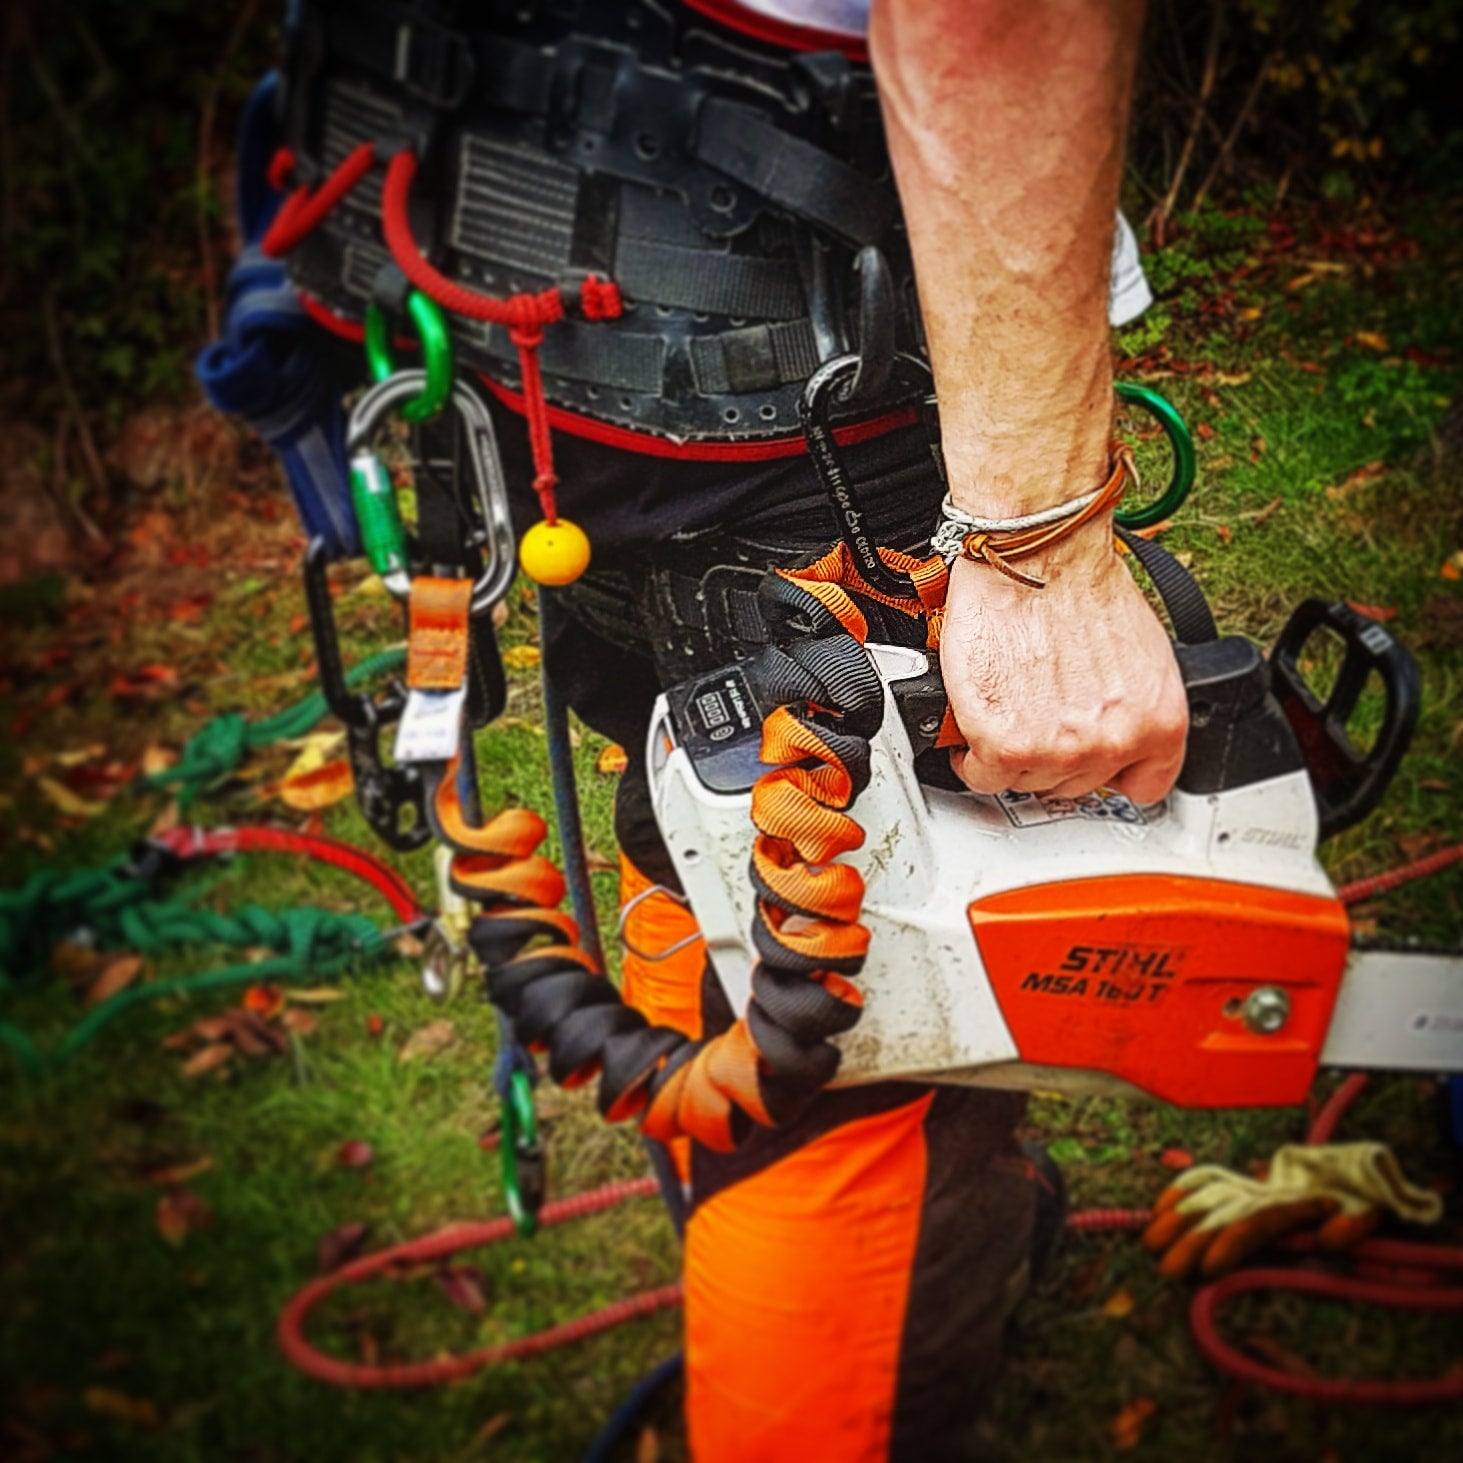 Weaver Coil Bungee Chainsaw Lanyard